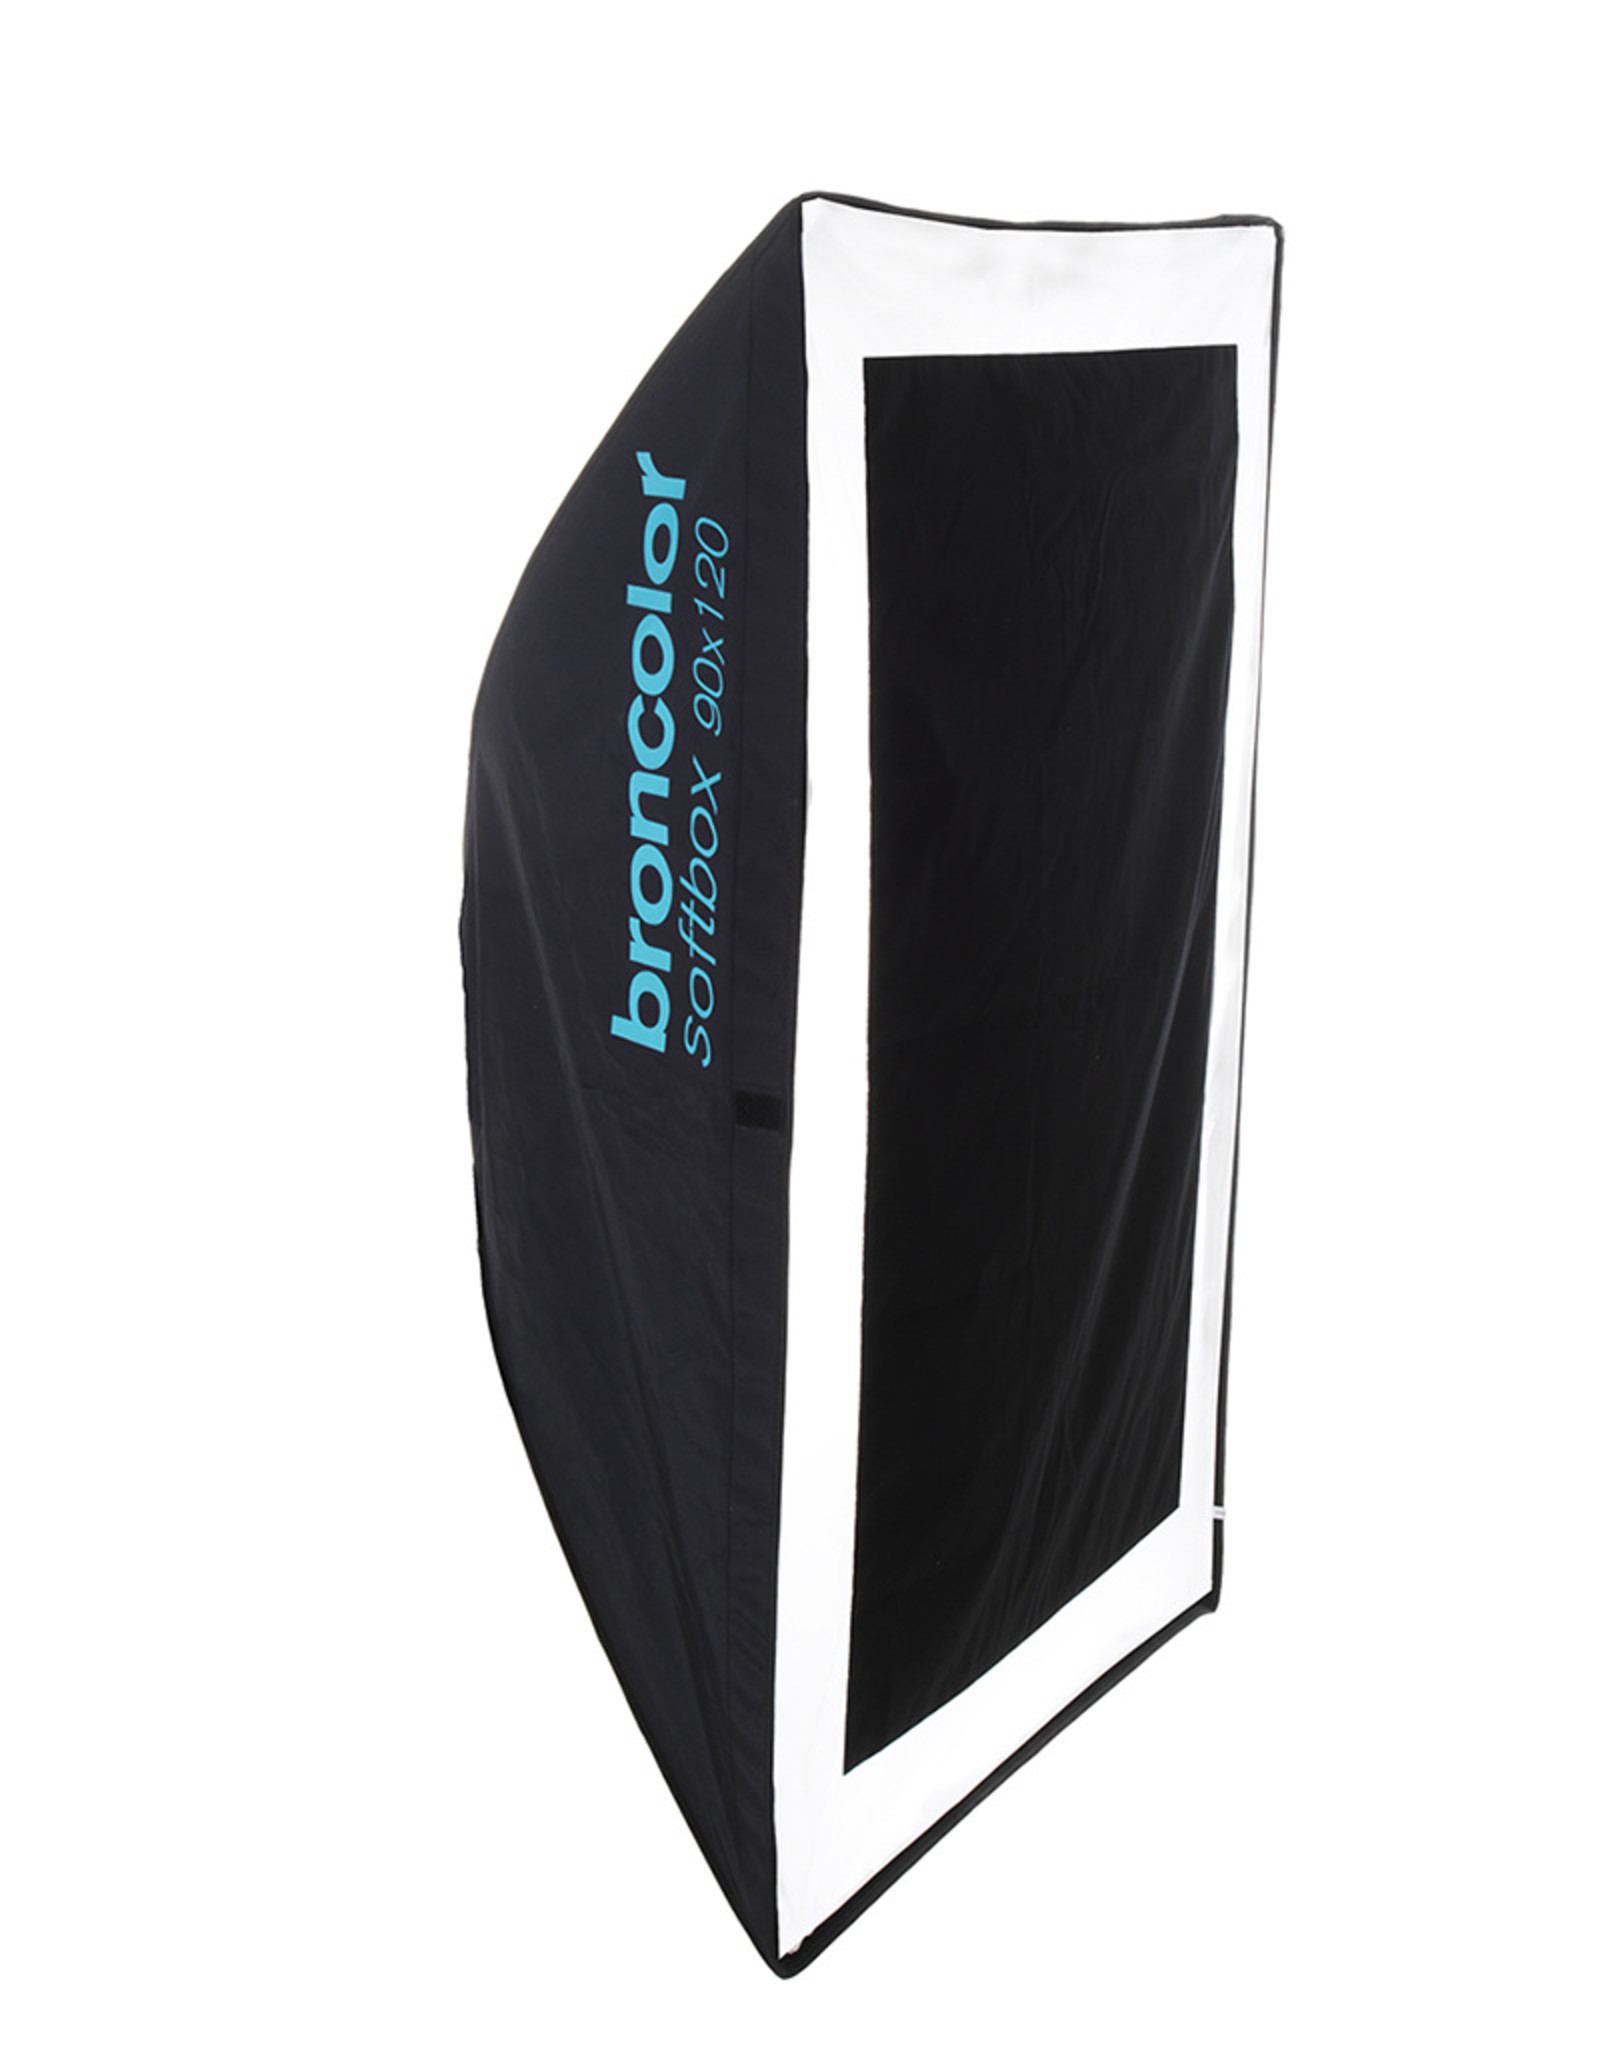 Broncolor Broncolor Edge Mask for Softbox